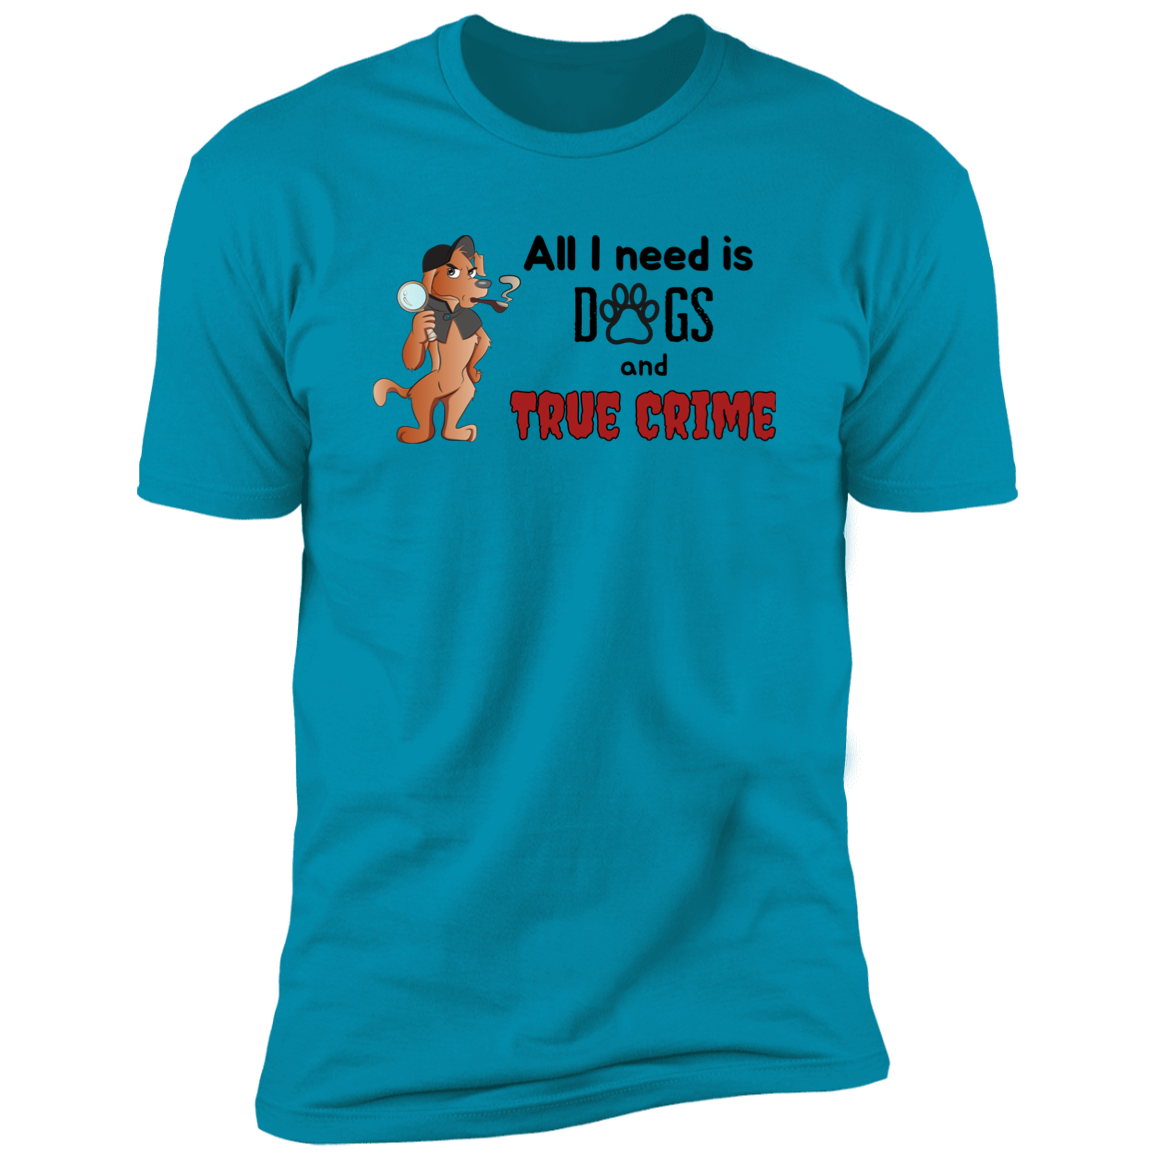 All I Need is Dogs and True Crime, Dog shirt for humas, in turquoise 